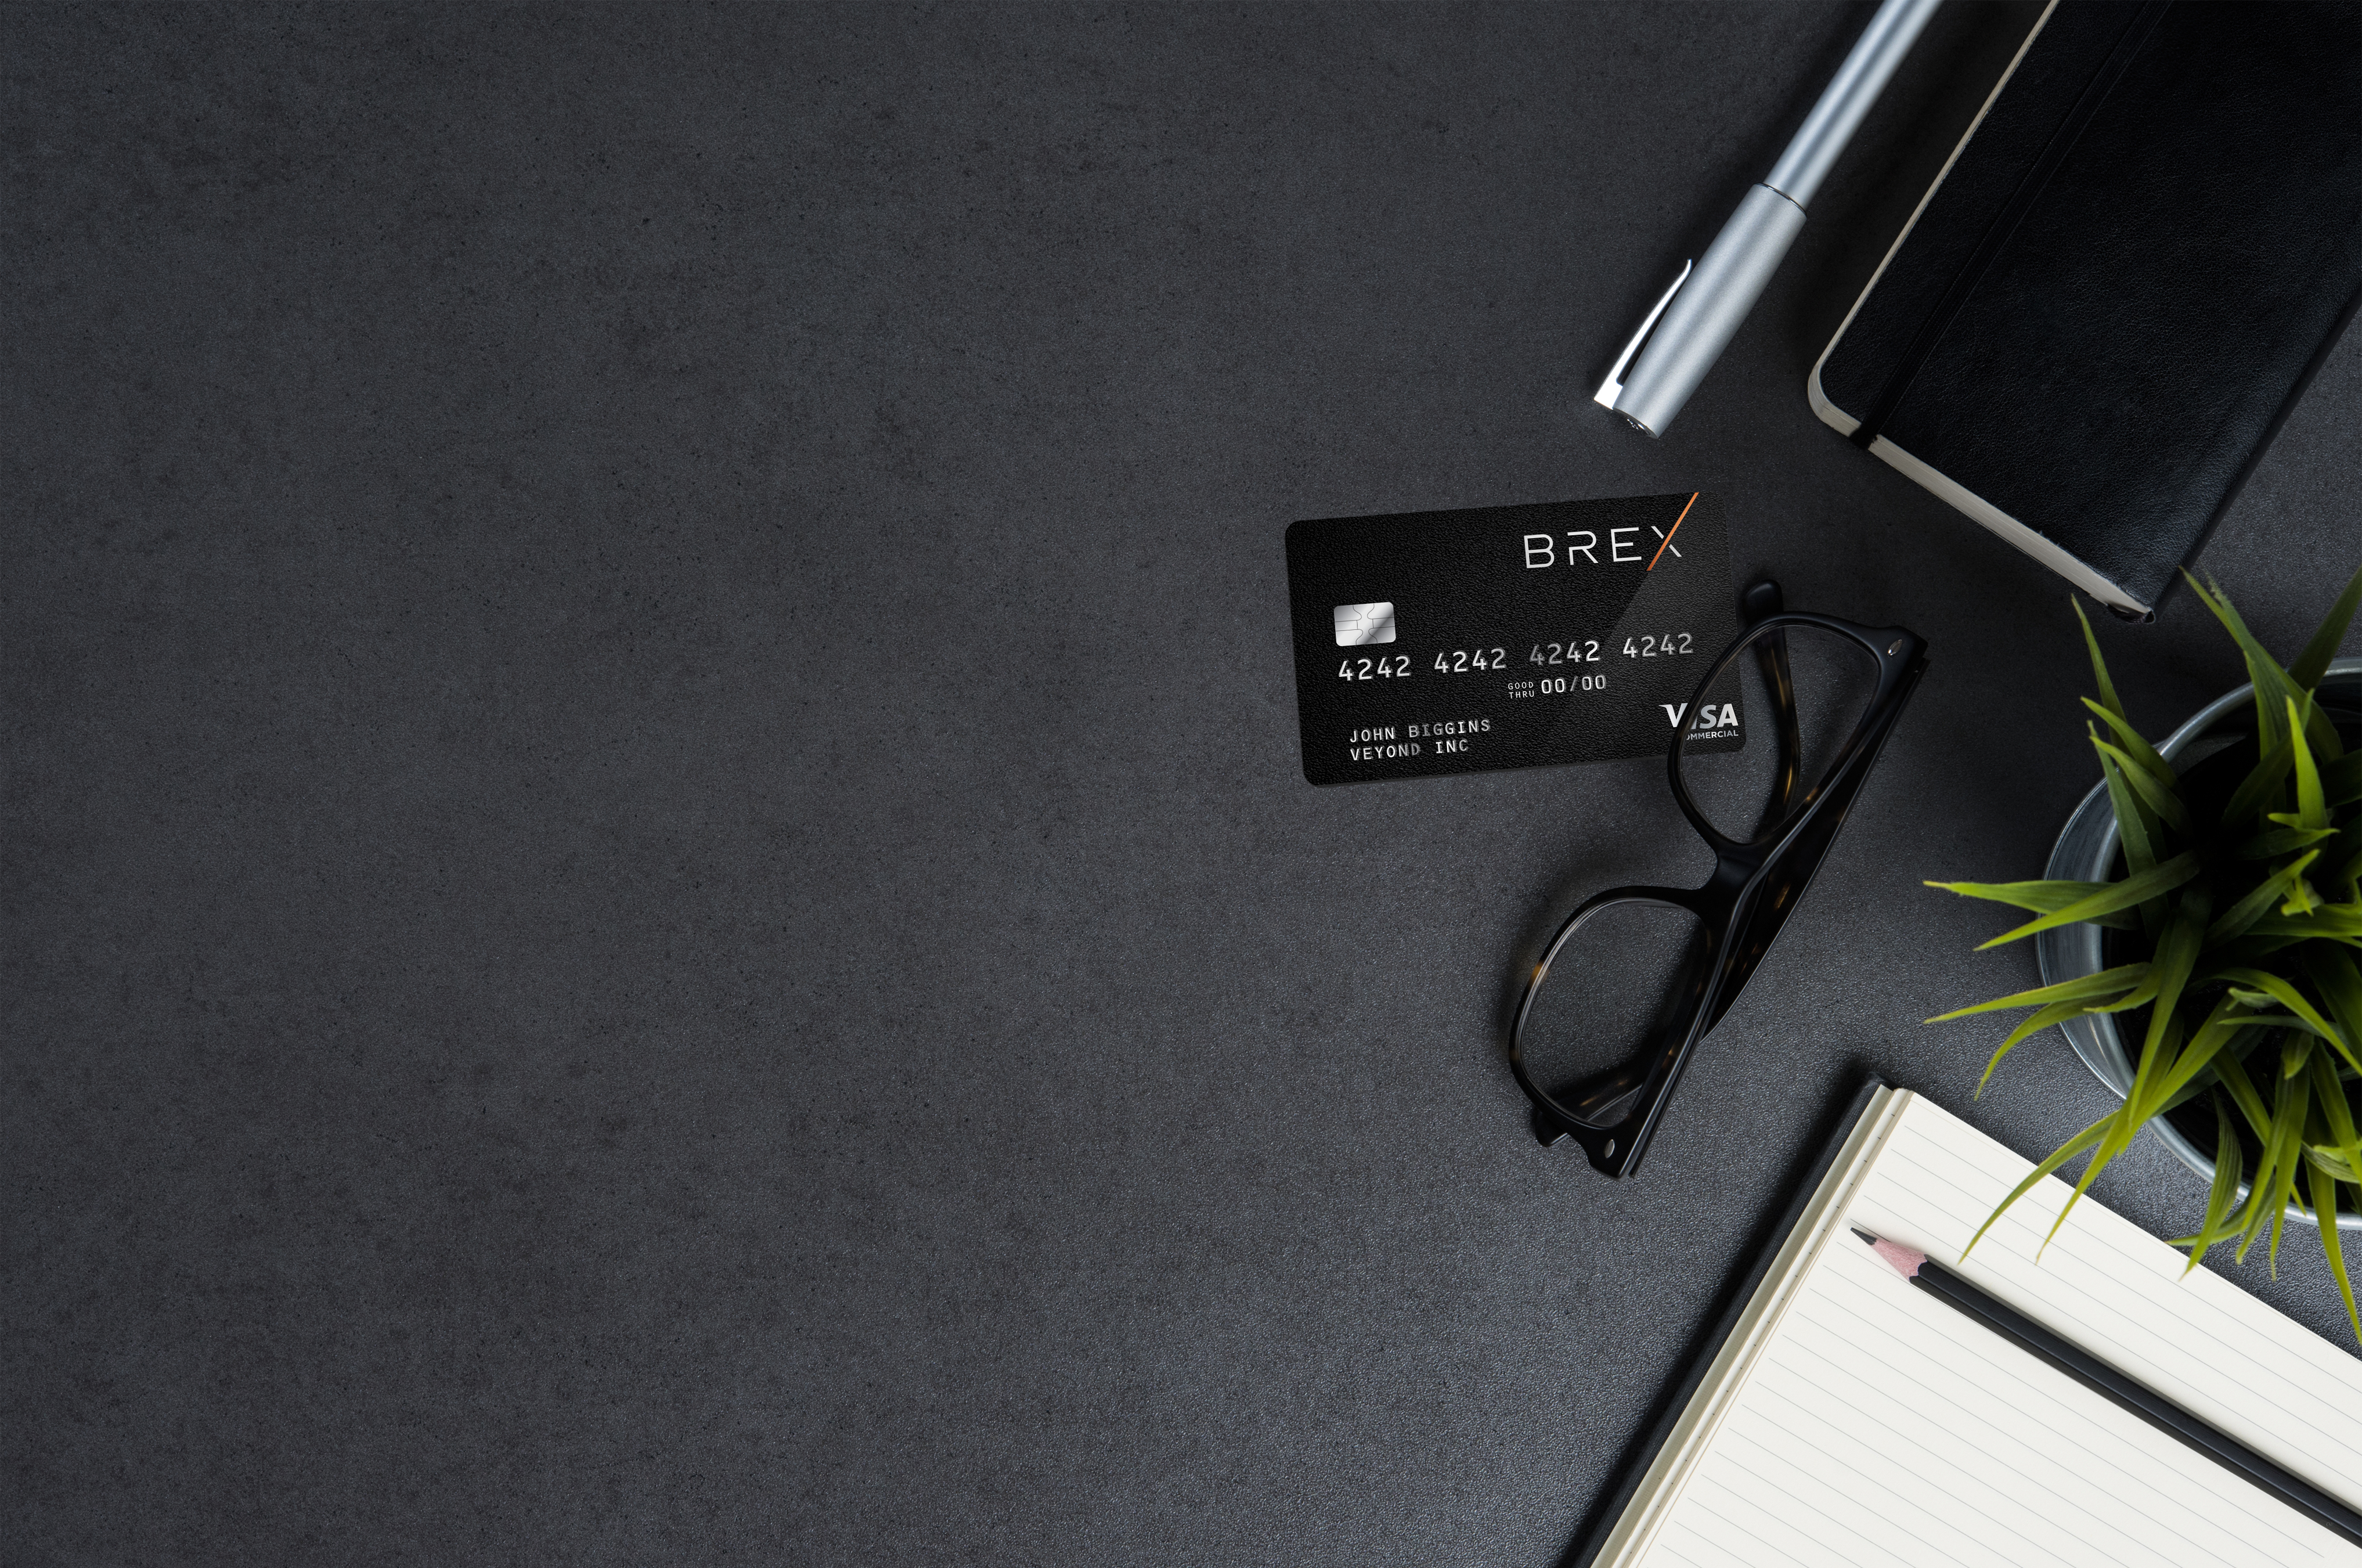 Why did Brex actually resolve to ditch SMBs? – TechCrunch